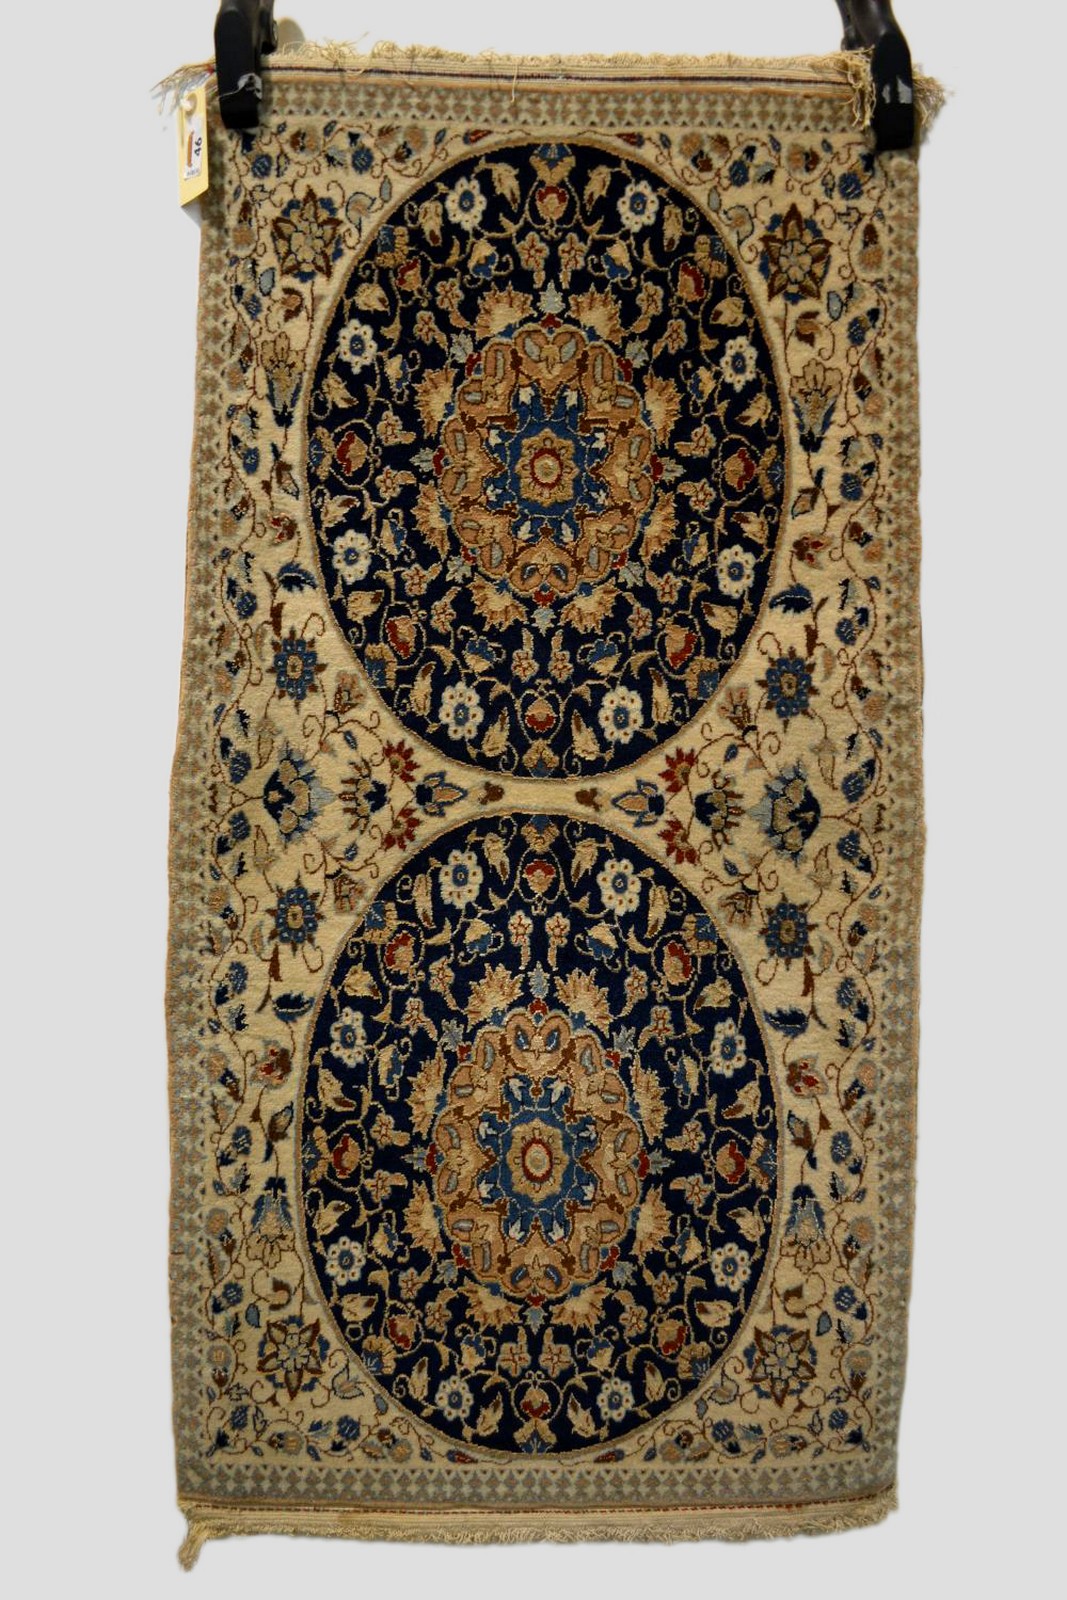 Fine Nain ‘Tudesh’ part silk rug, south west Persia, 20th century, 3ft. 3in. x 1ft. 8in. 1m. x 0.